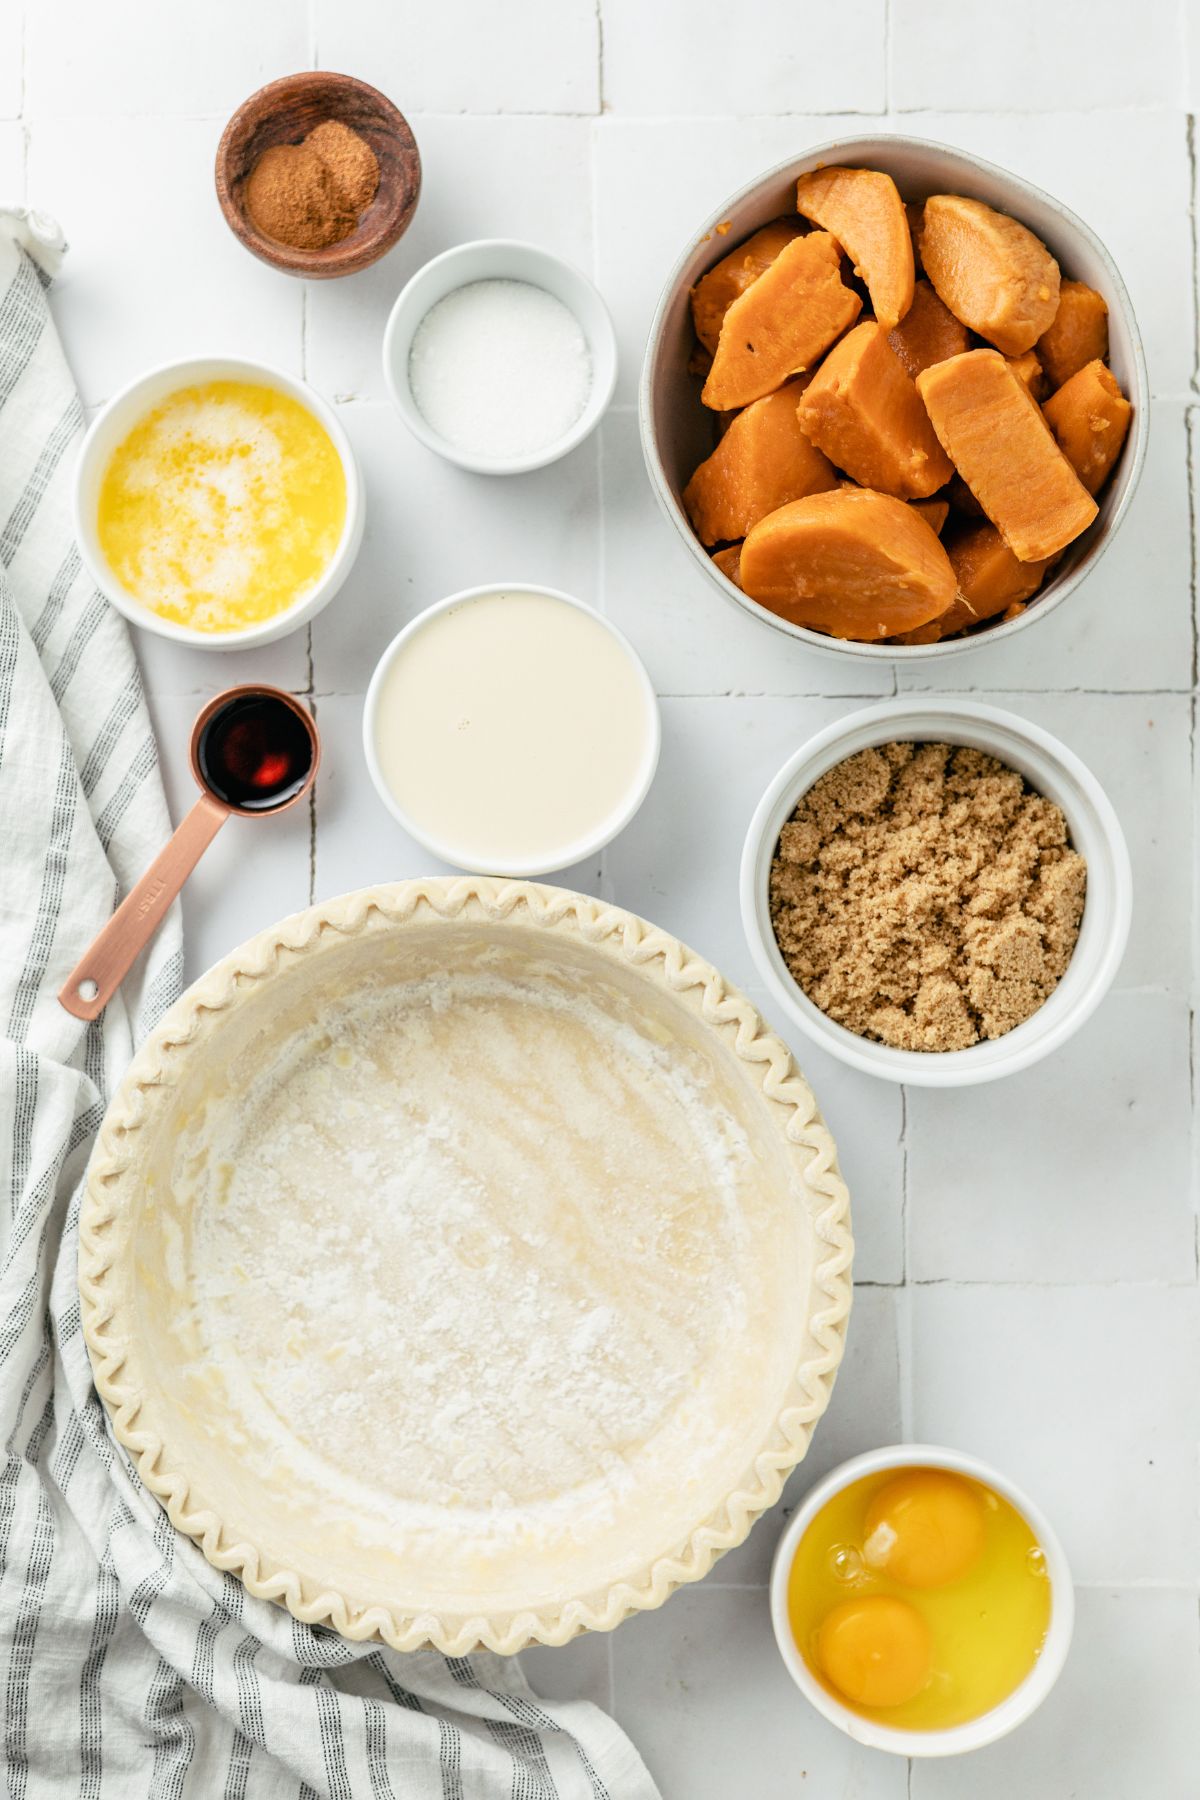 ingredients needed to make canned yams sweet potato pie like: frozen pie crust in an aluminum pie plate, canned sweet potatoes, melted butter, brown sugar, white sugar, evaporated milk eggs, cinnamon, nutmeg, vanilla extract in separate containers